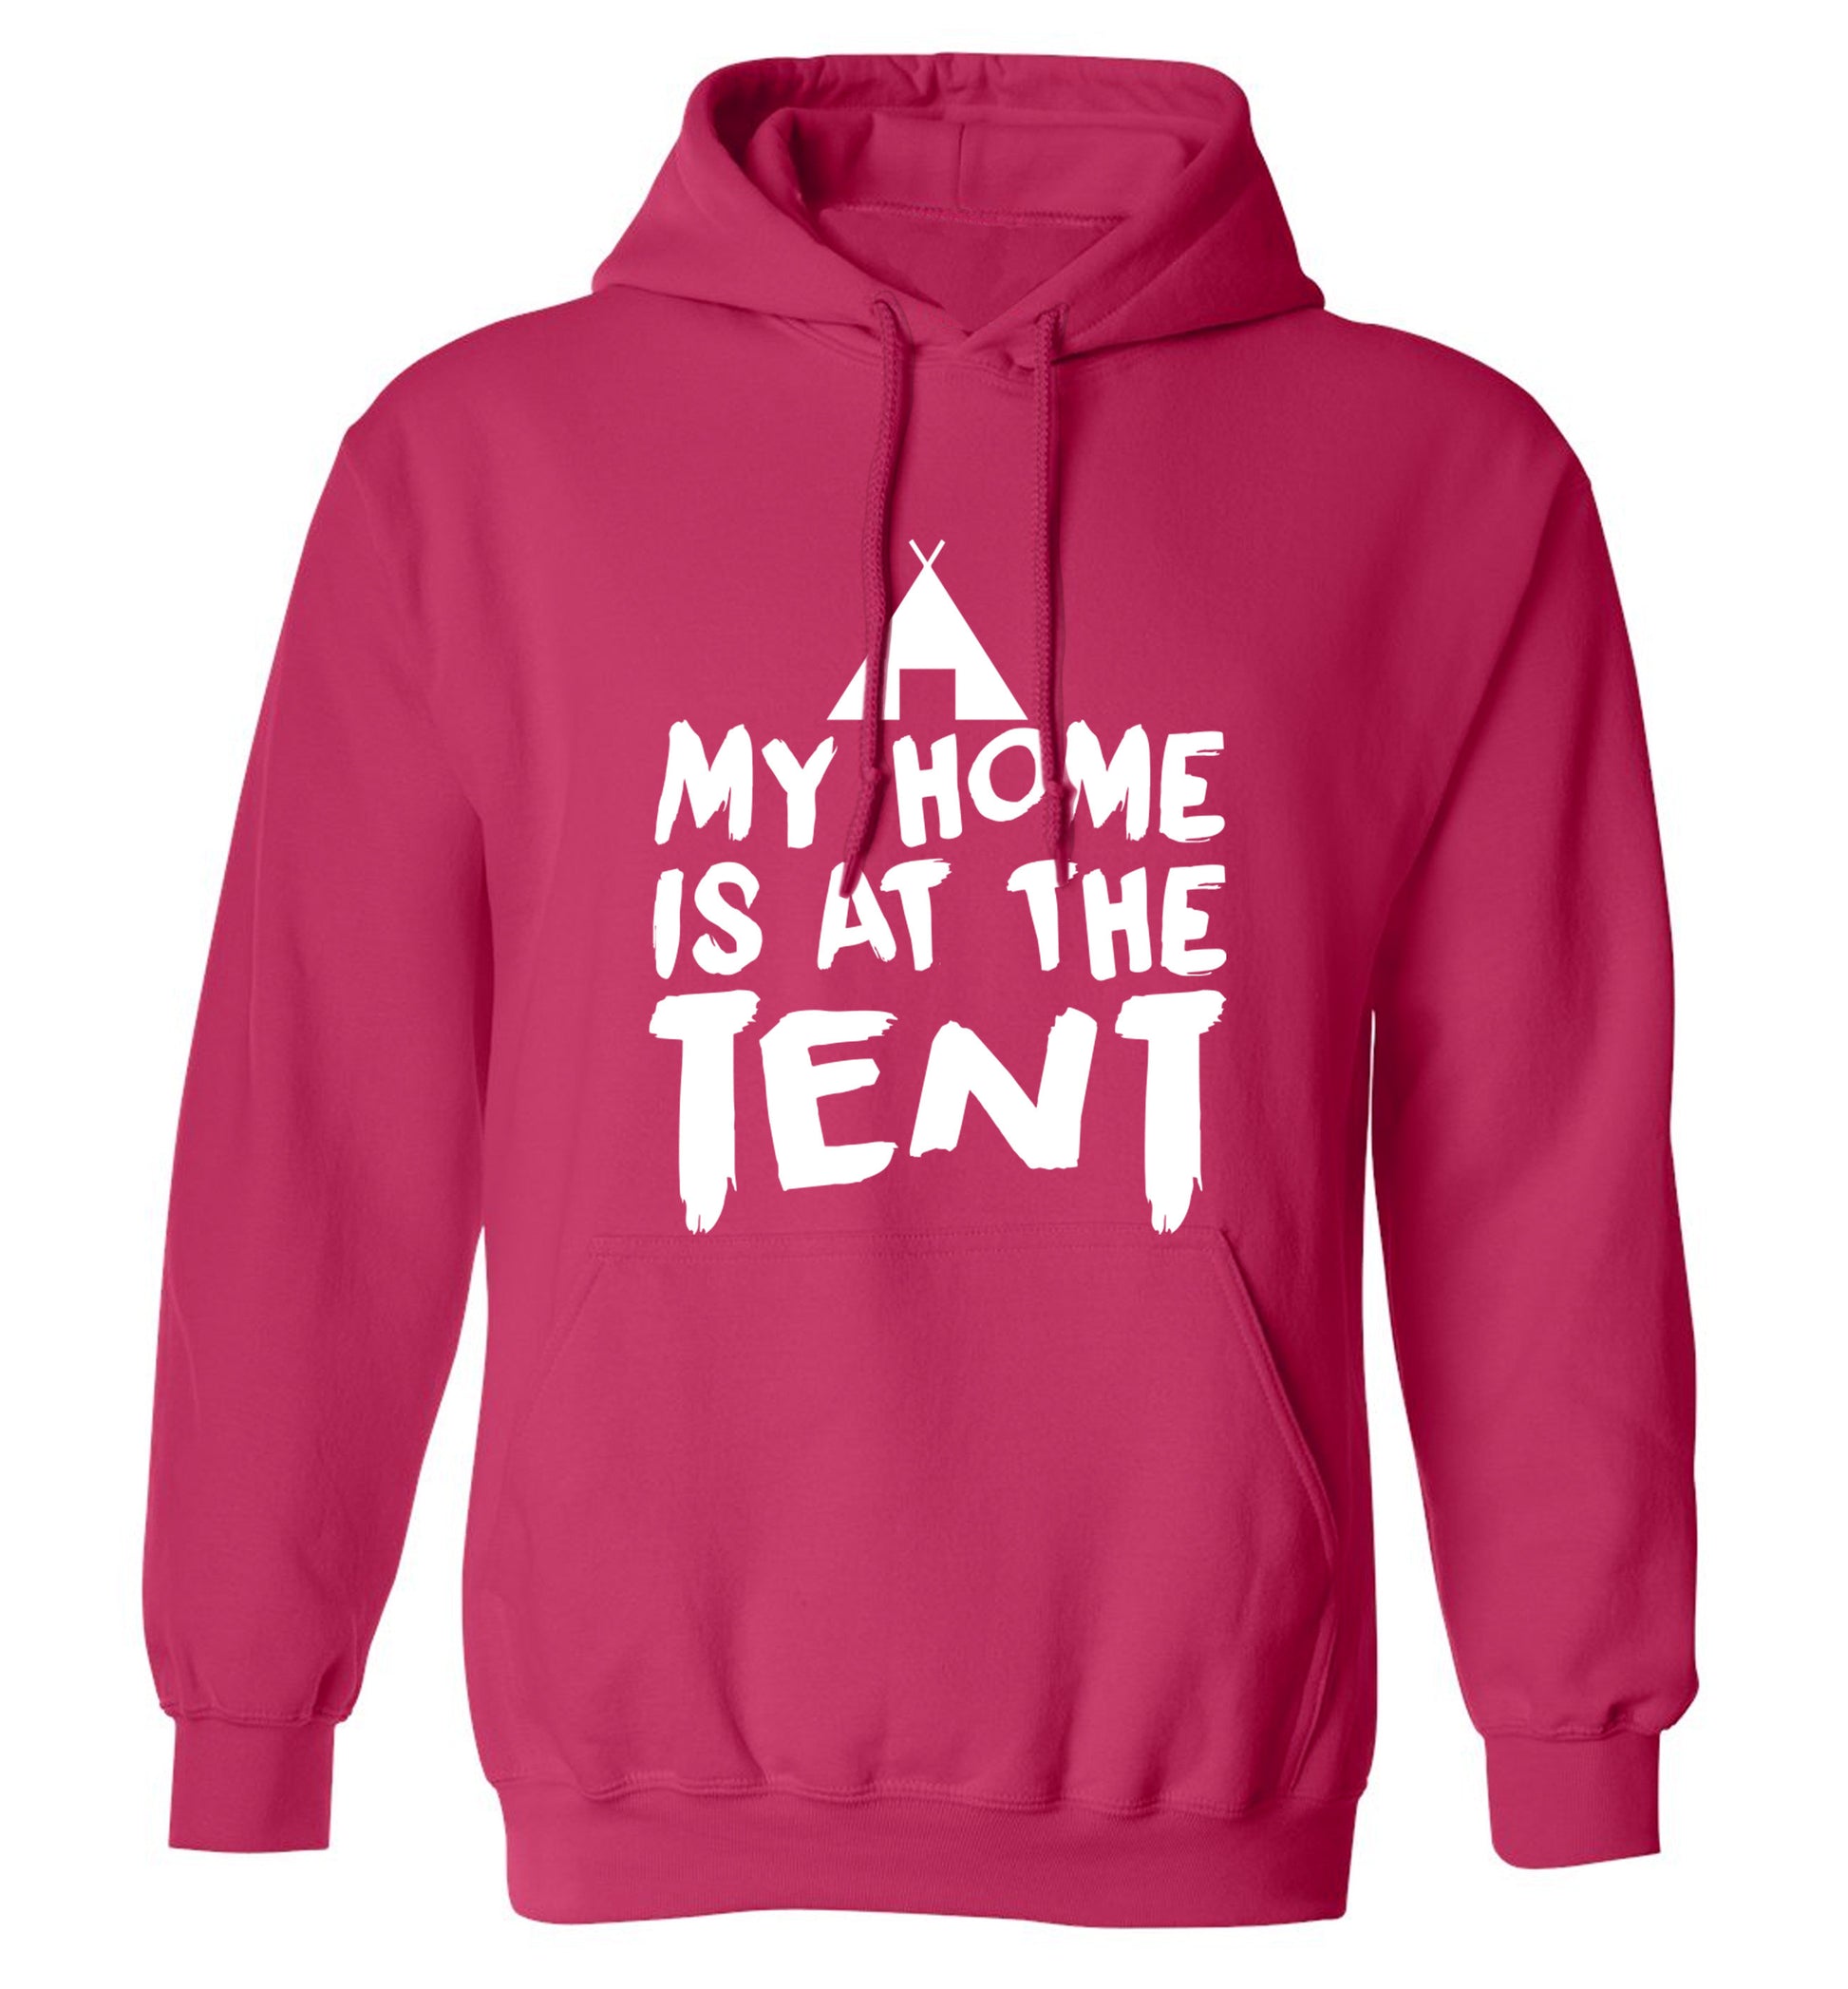 My home is at the tent adults unisex pink hoodie 2XL